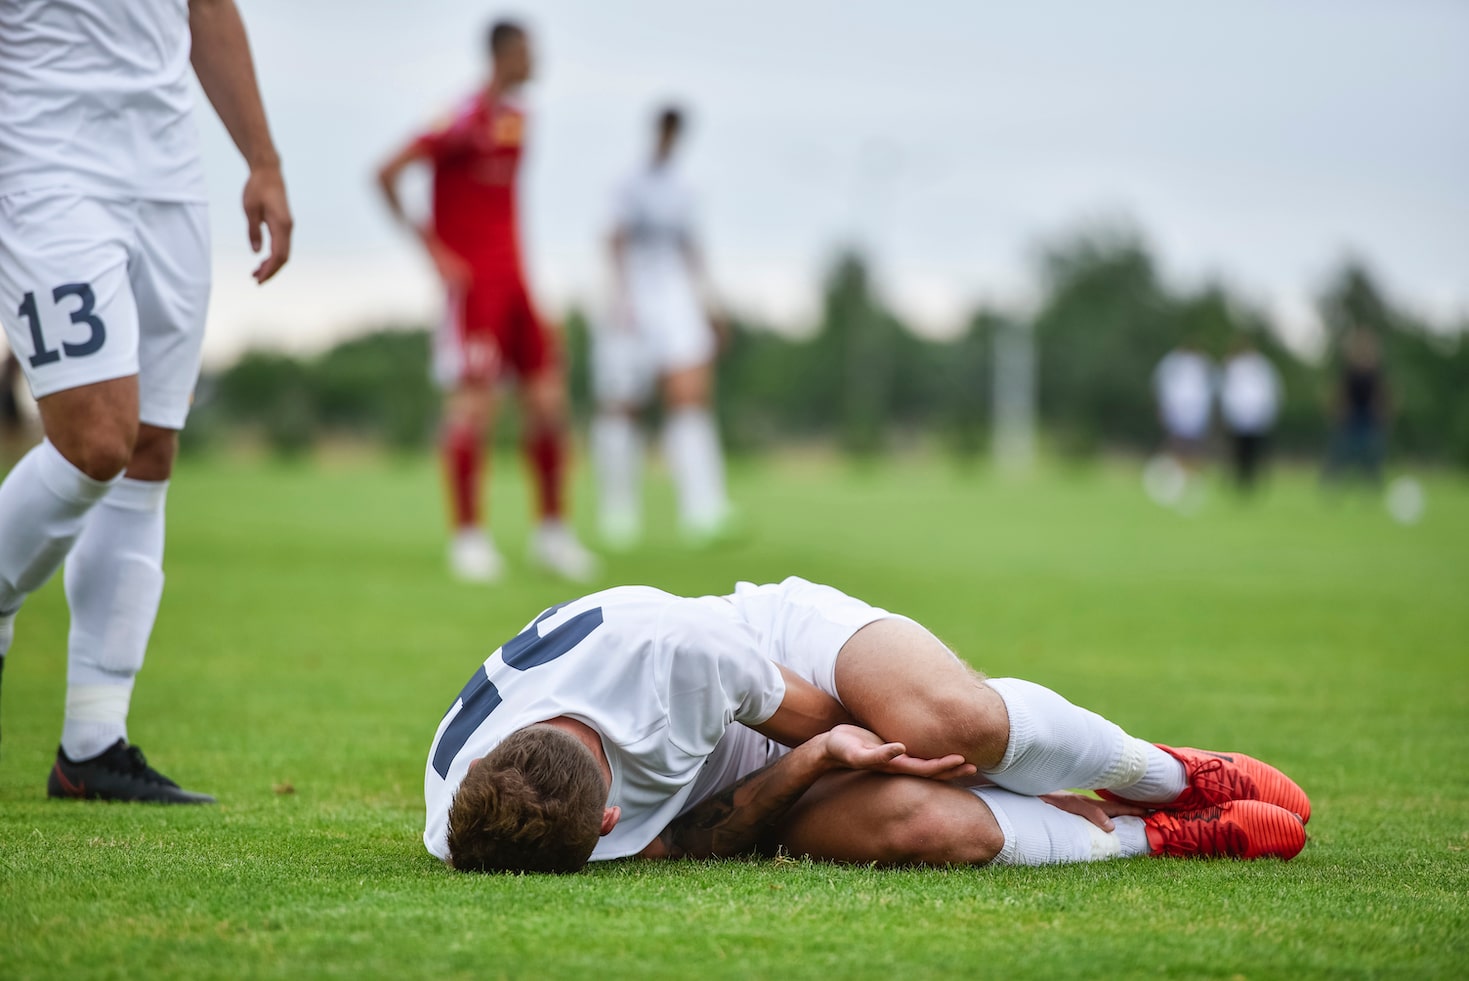 injuries in soccer